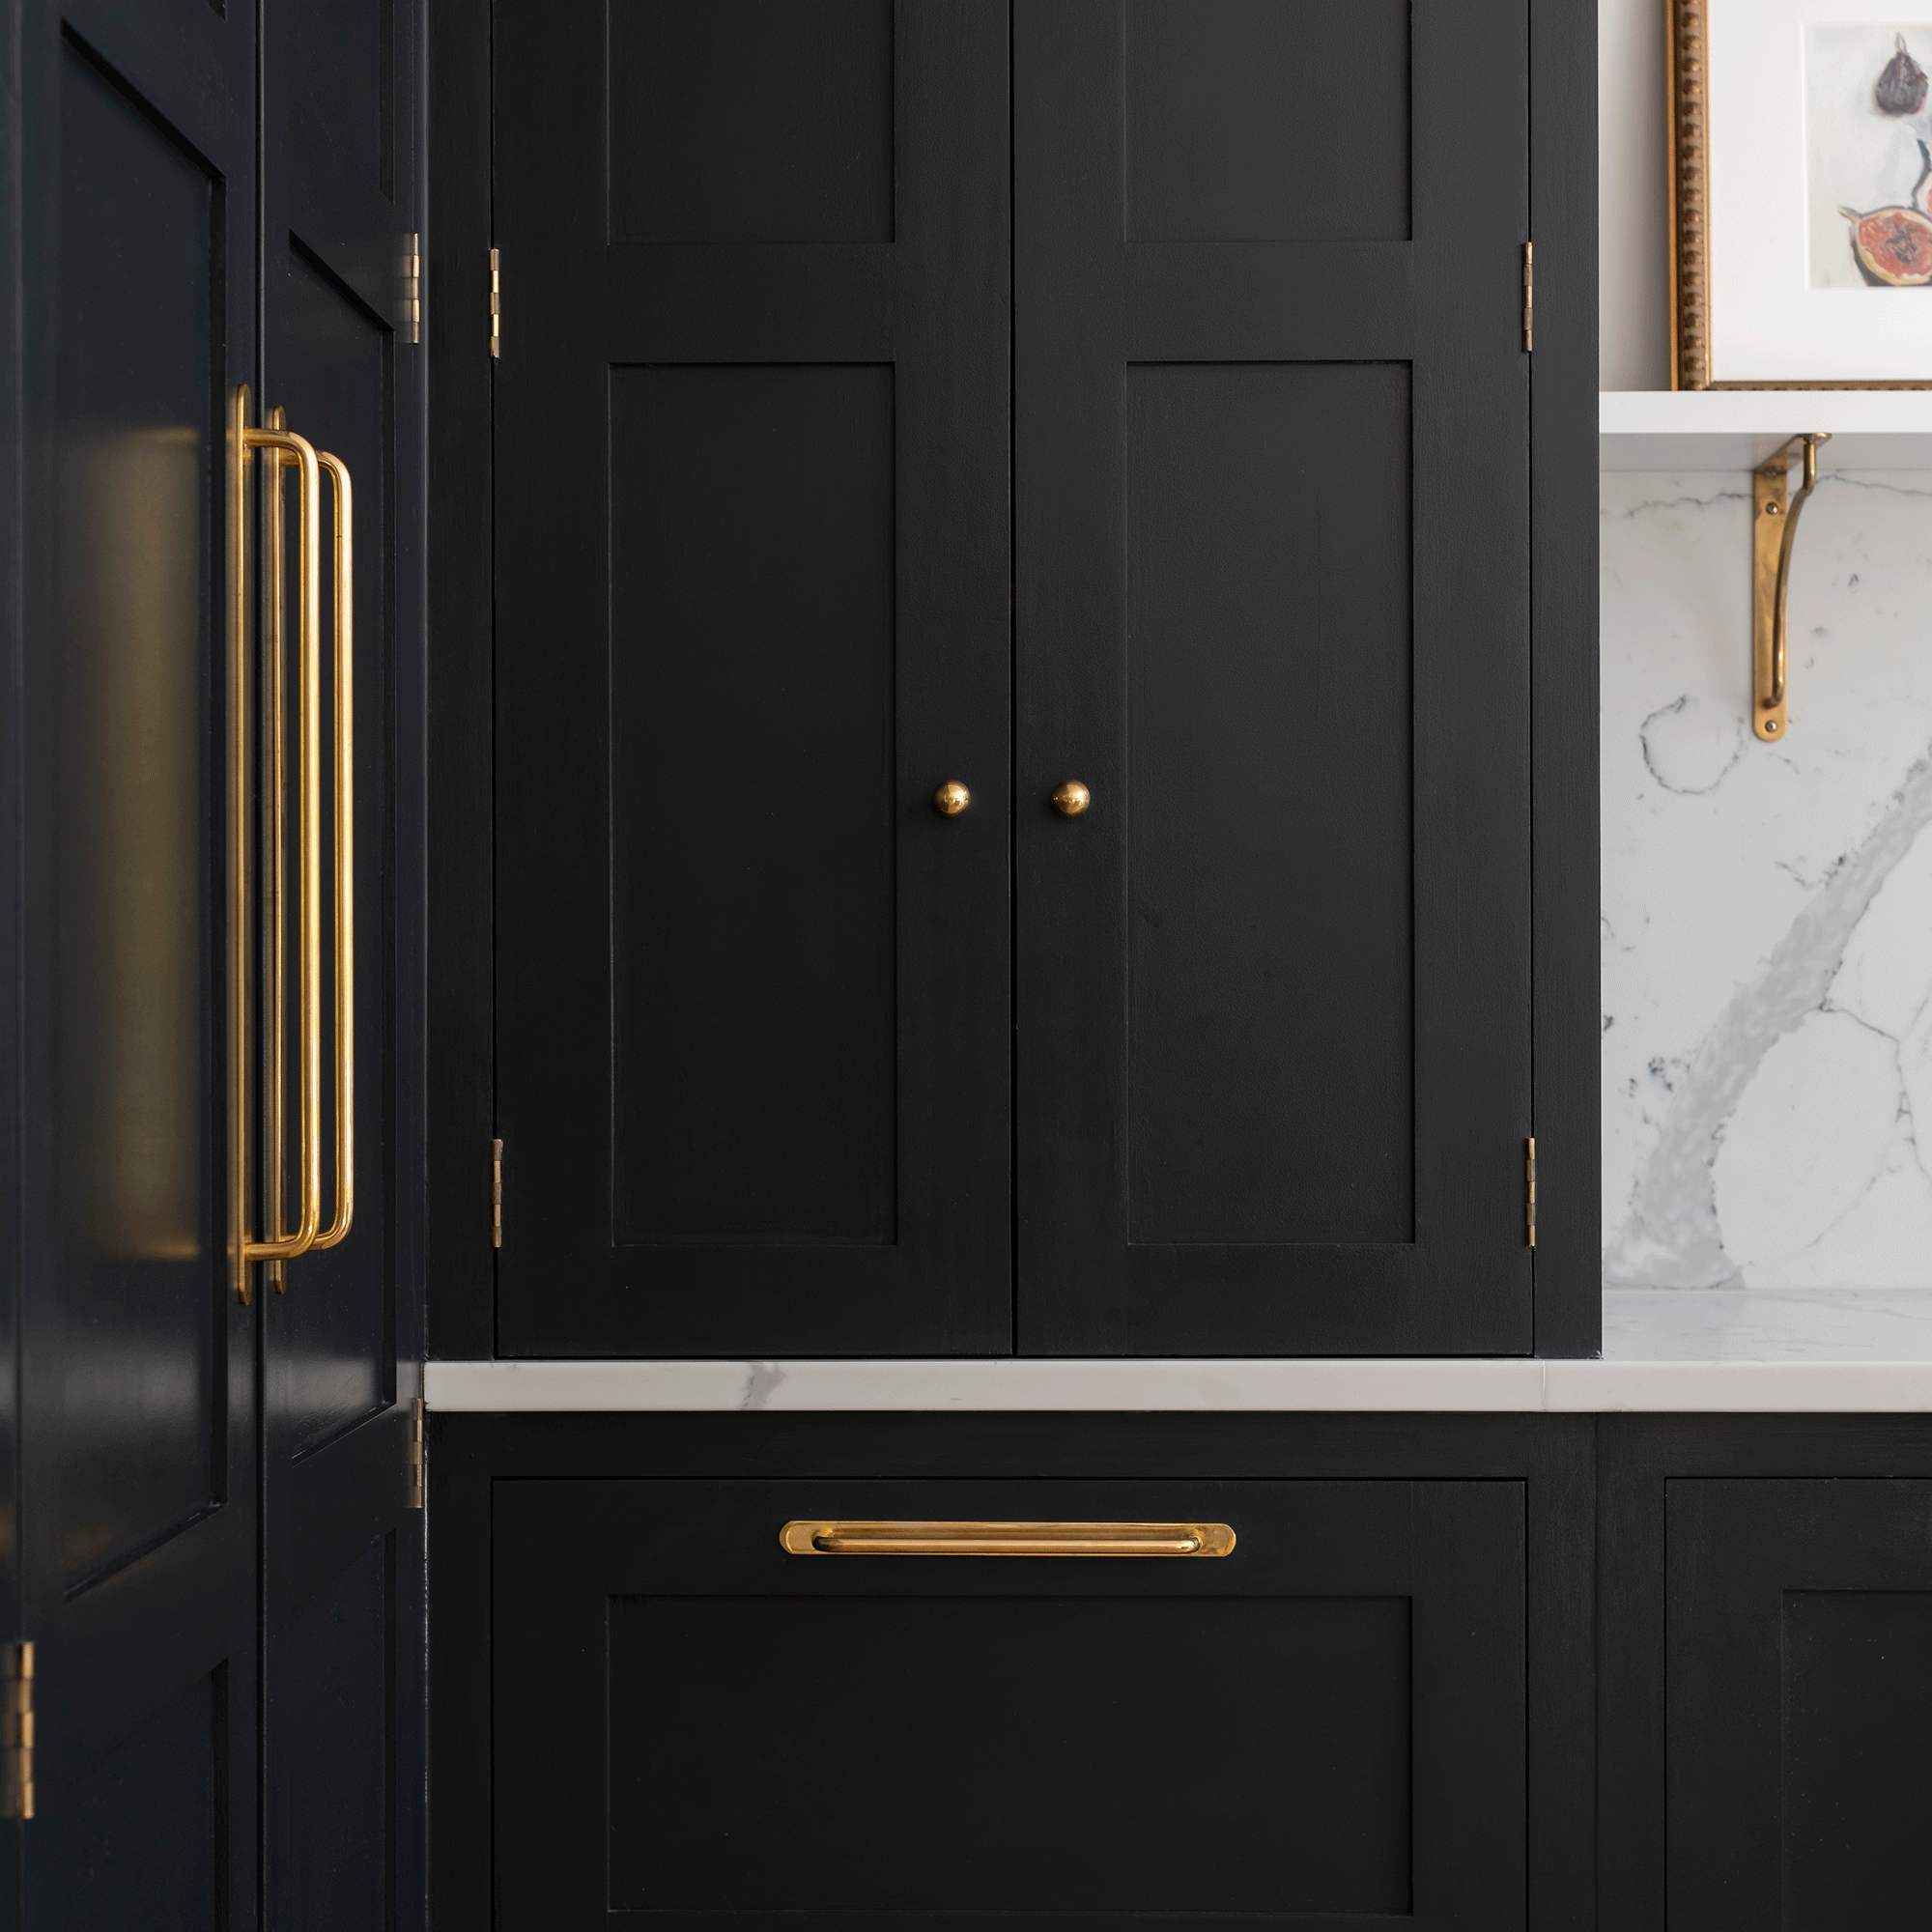 Black kitchen cabinets with gold handles